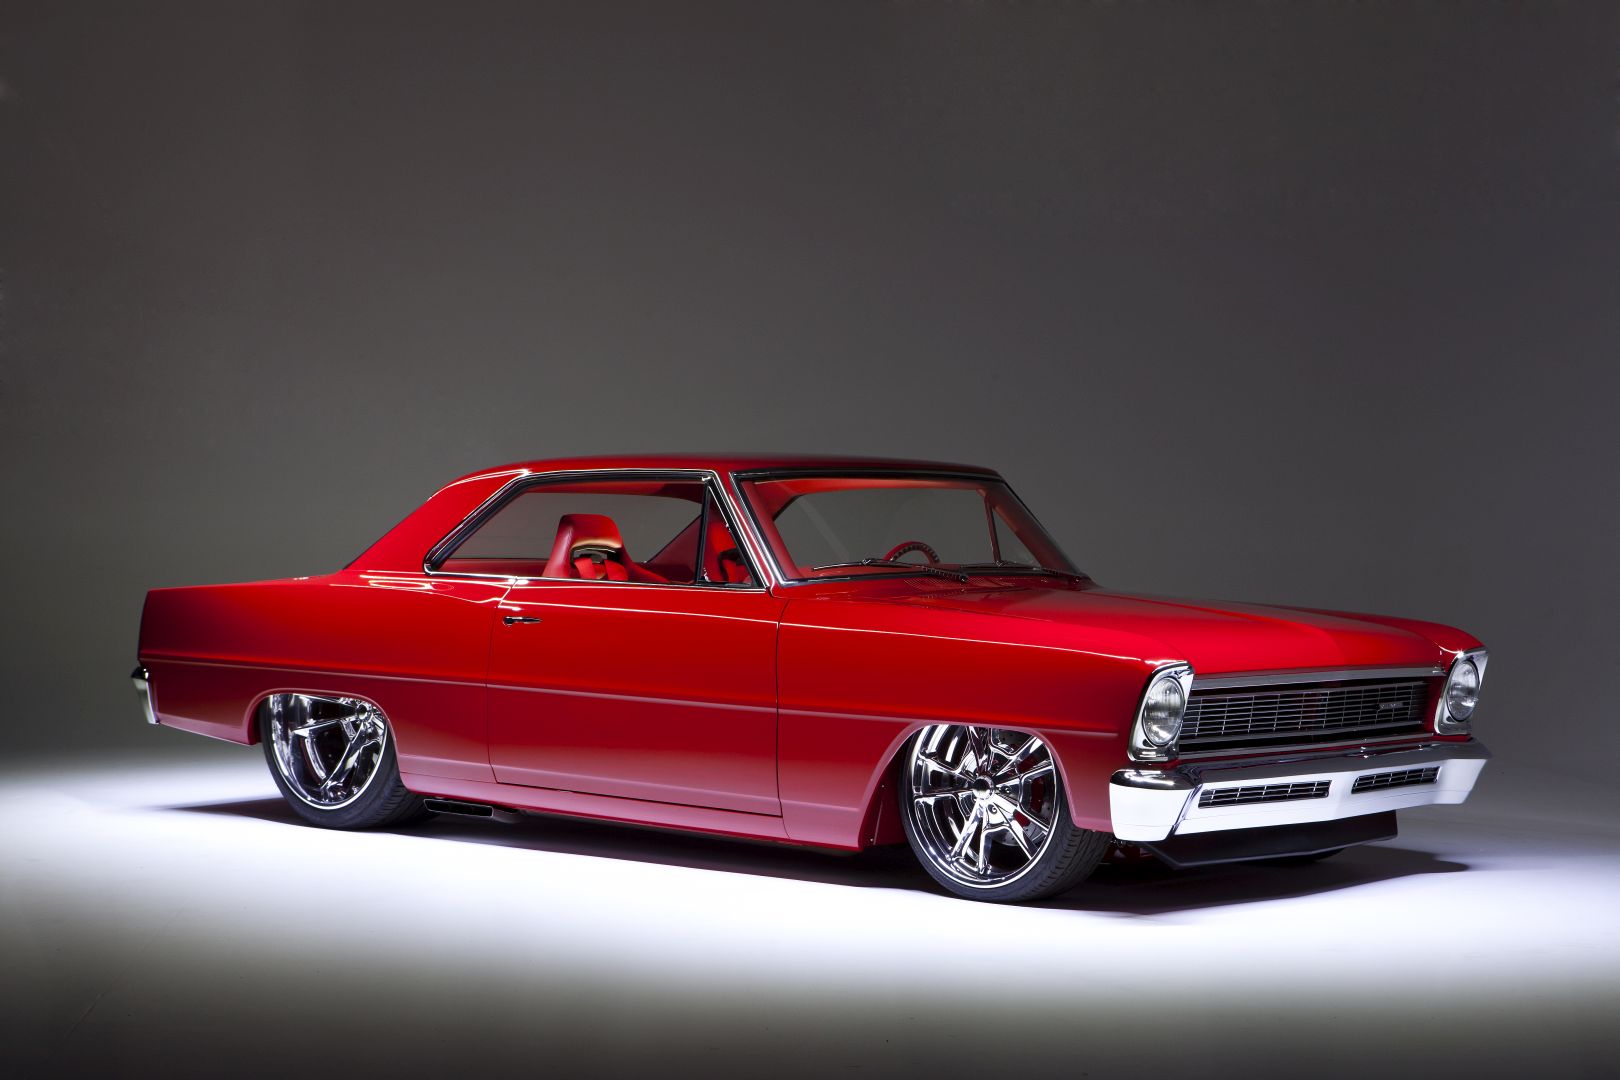 https://s1.cdn.autoevolution.com/images/news/gallery/1966-chevy-nova-red-devil-has-two-of-everything_6.jpg